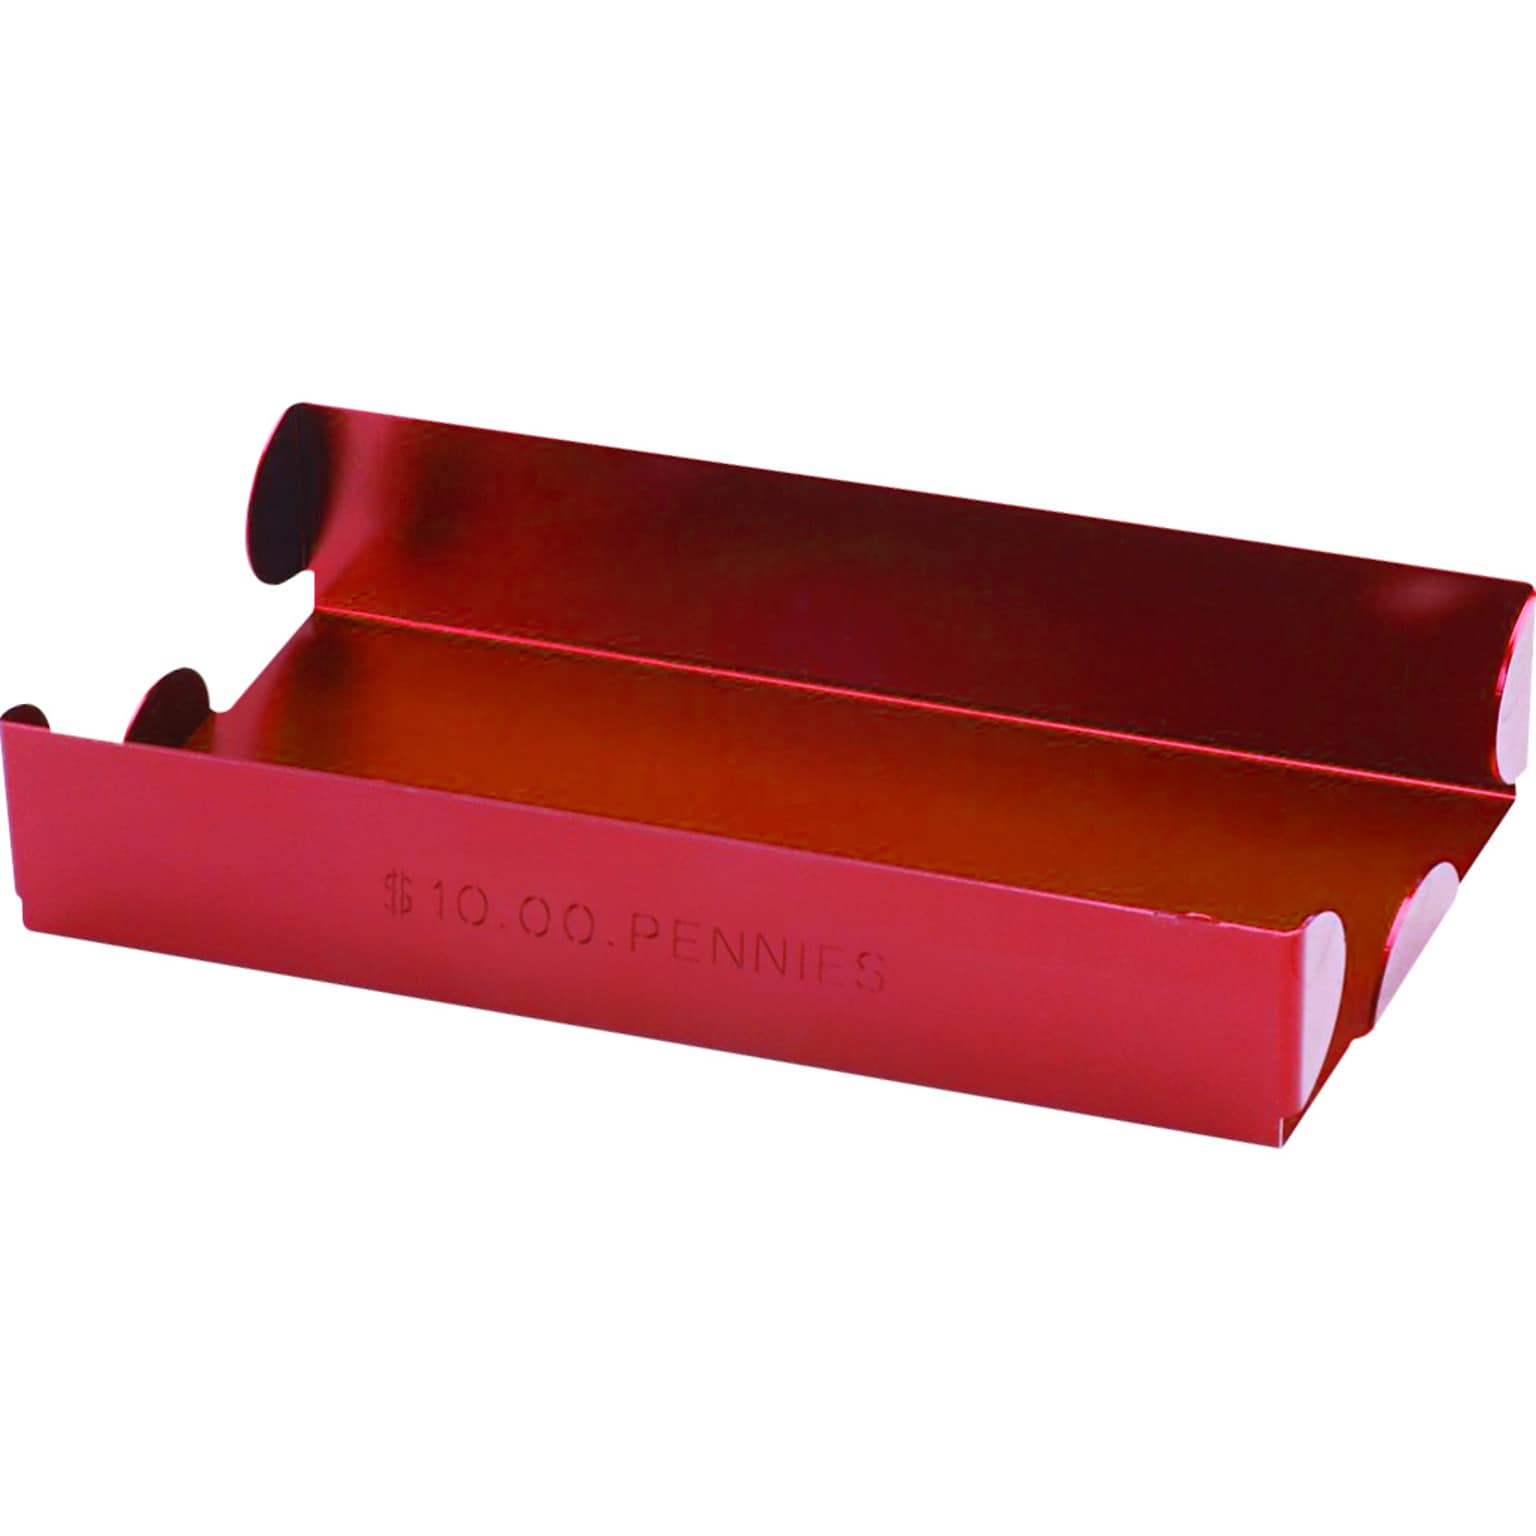 Control Papers $10 Pennies Tray, 1-Compartment, Red, 50/Carton (560065 FC)